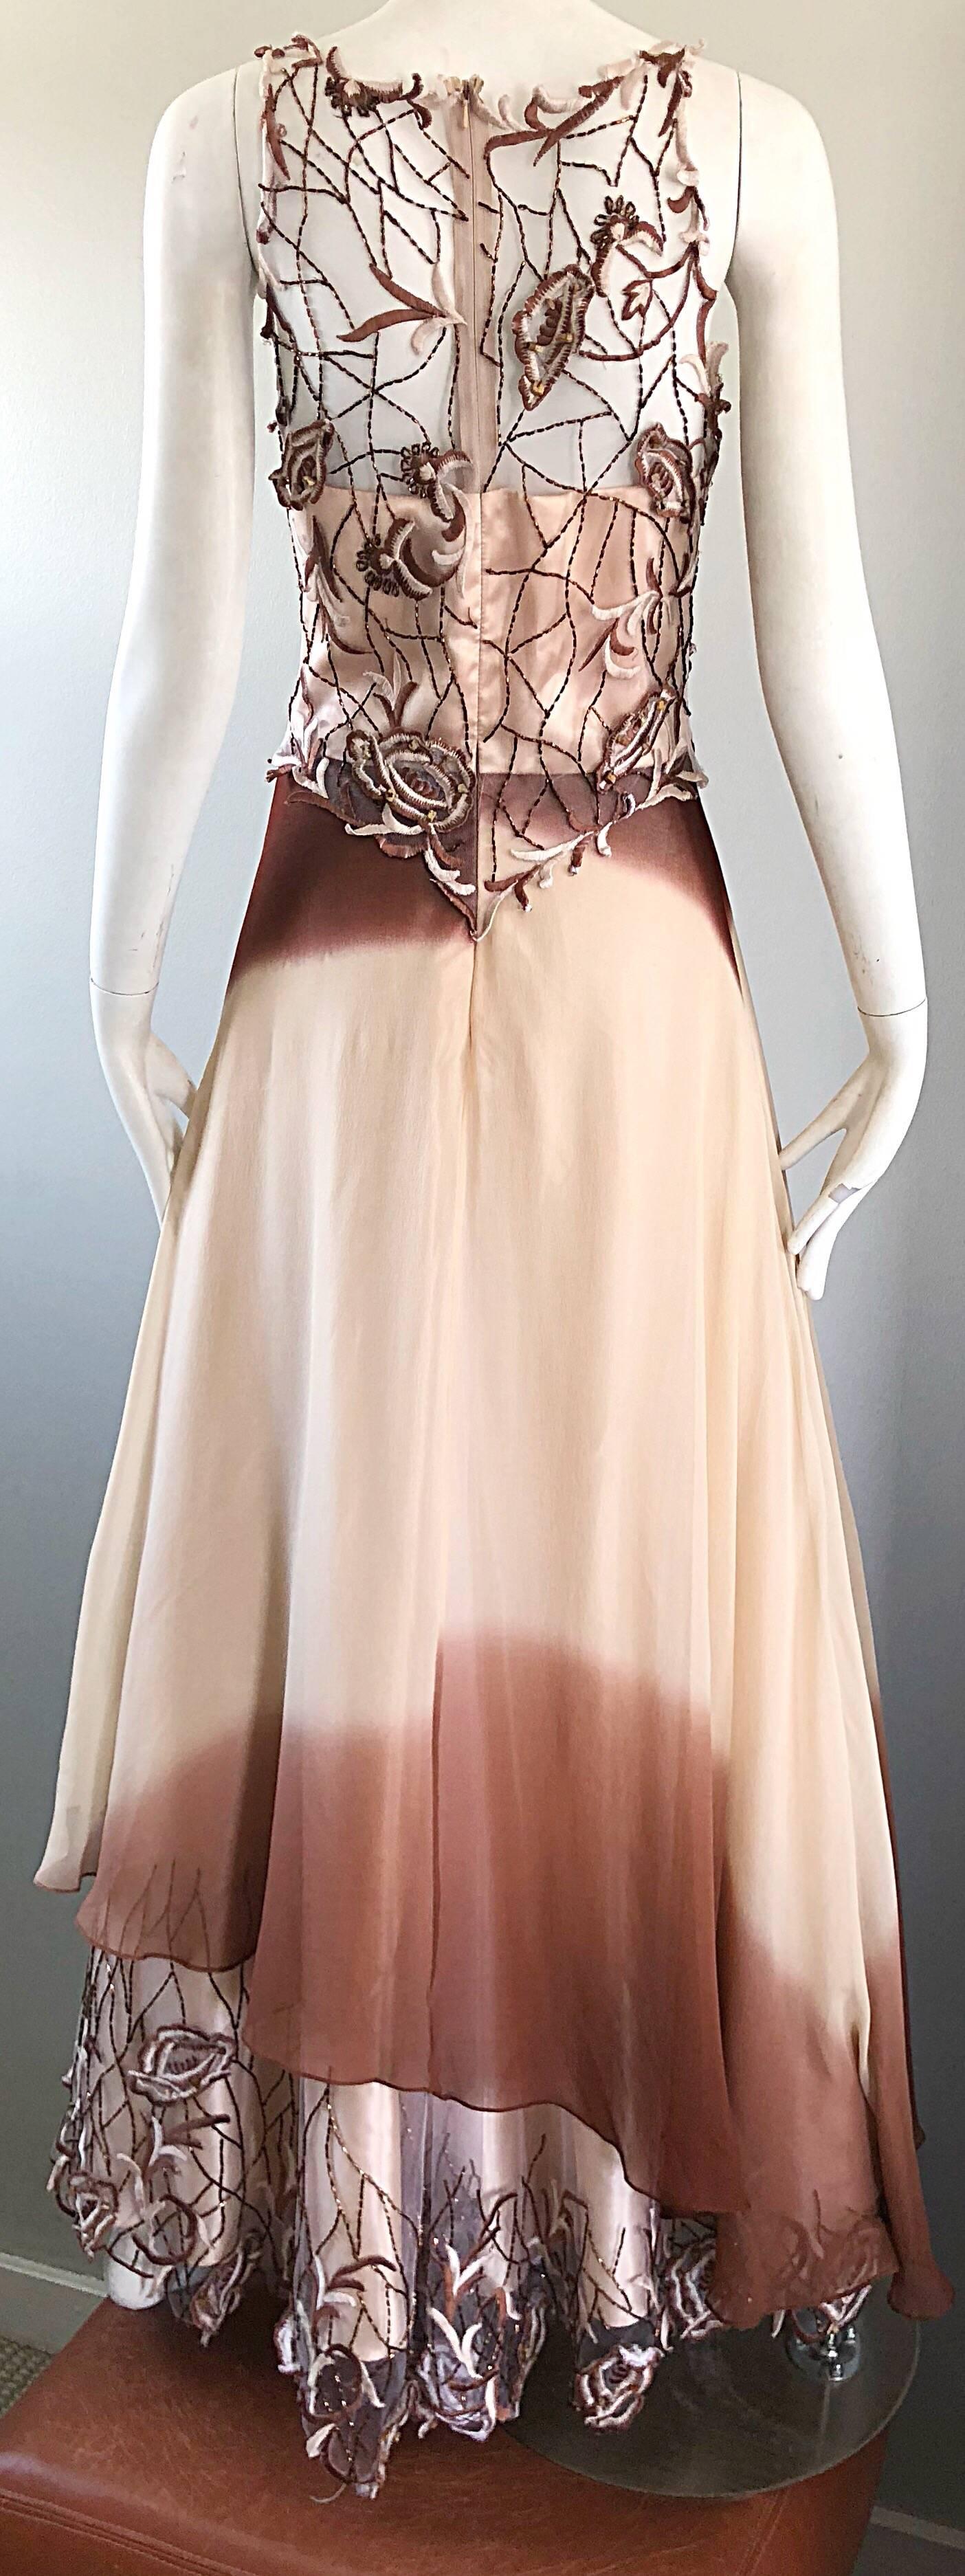 Max Nugus Haute Couture 1990s Size 6 8 Pink Brown Ombre Chiffon Vintage 90s Gown For Sale 8